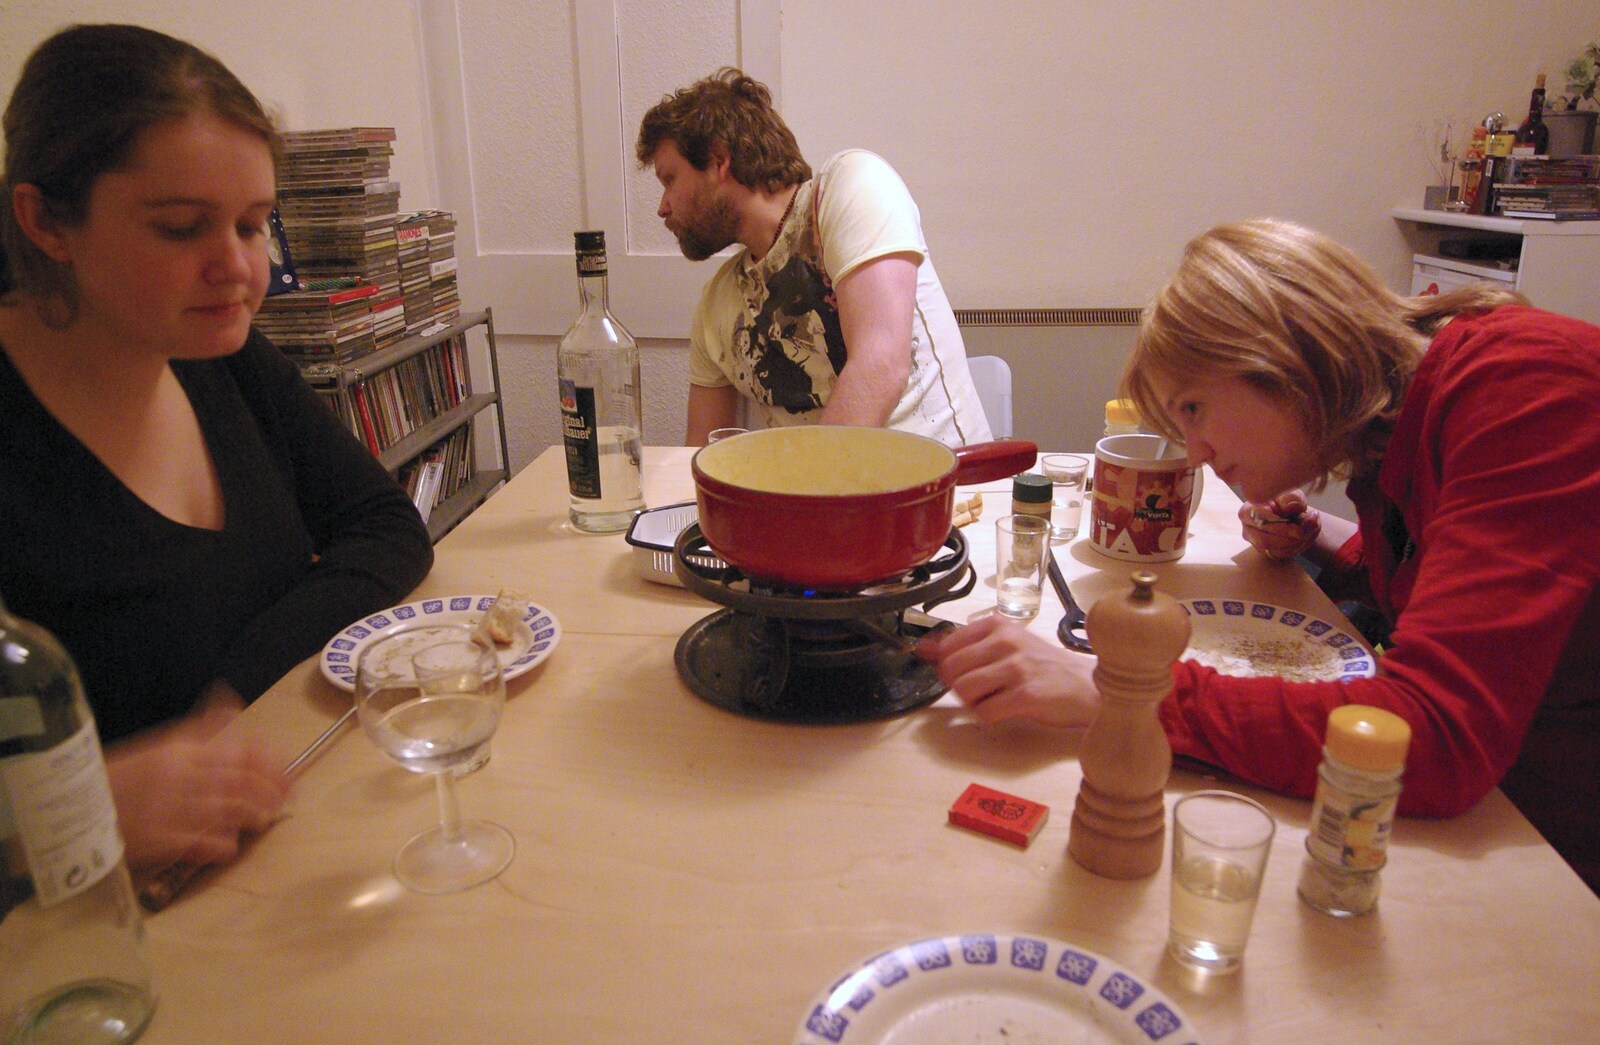 Rachel does some adjustments from A Swiss Fondue with Bus-Stop Rachel and Sam, Gwydir Street, Cambridge - 1st March 2007